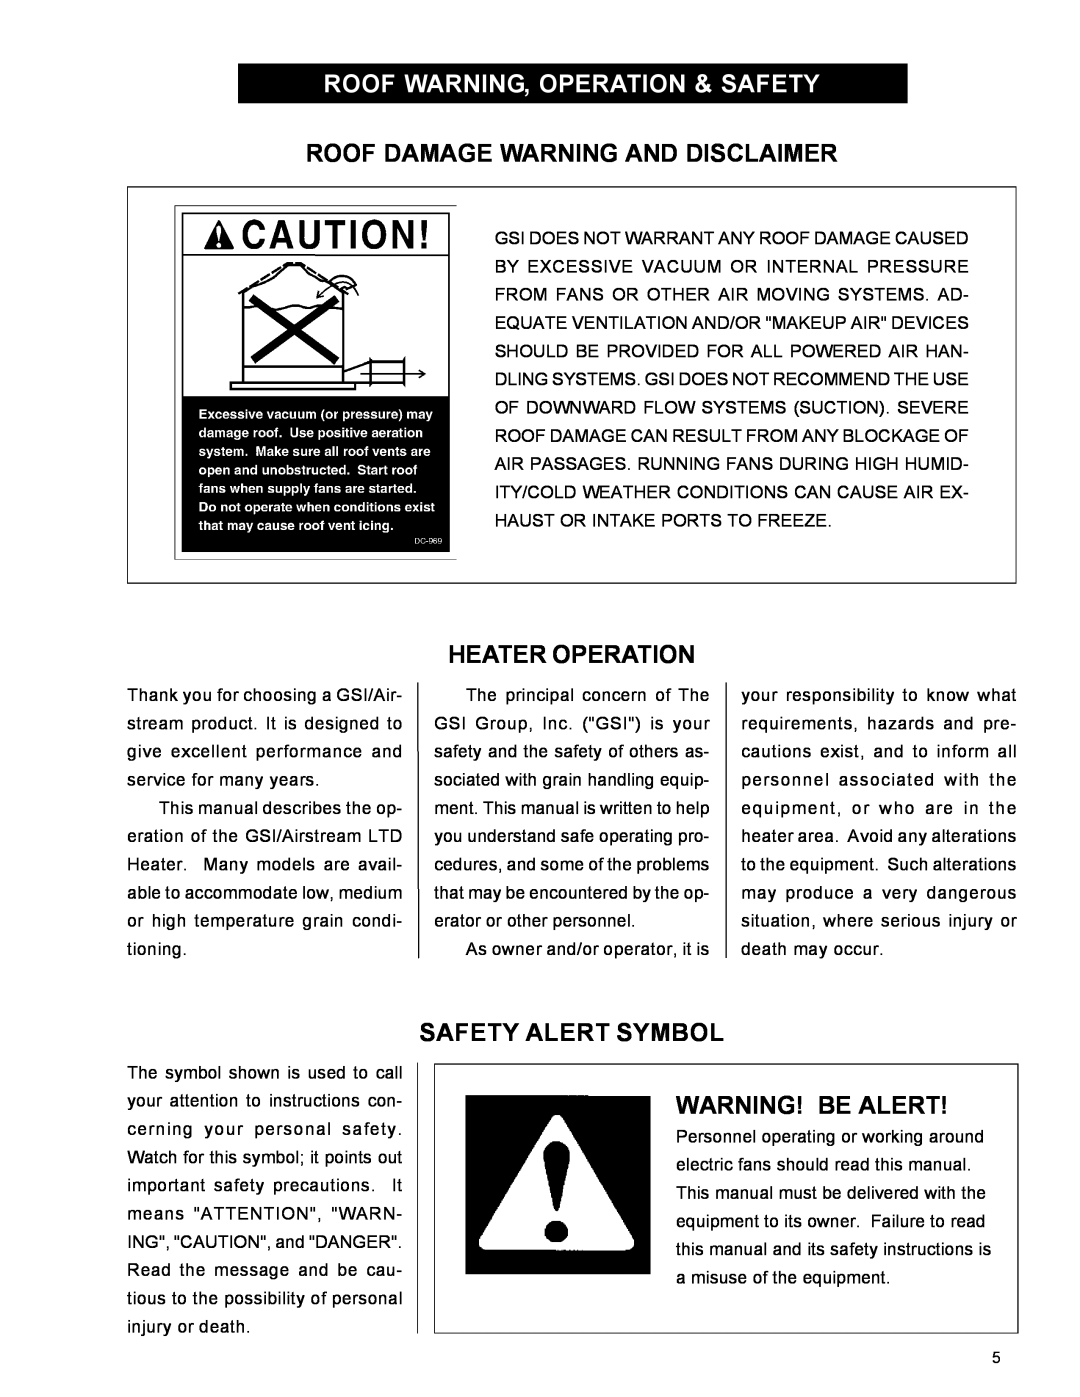 Airstream 18 owner manual Roof Warning, Operation & Safety, Roof Damage Warning And Disclaimer, Heater Operation 